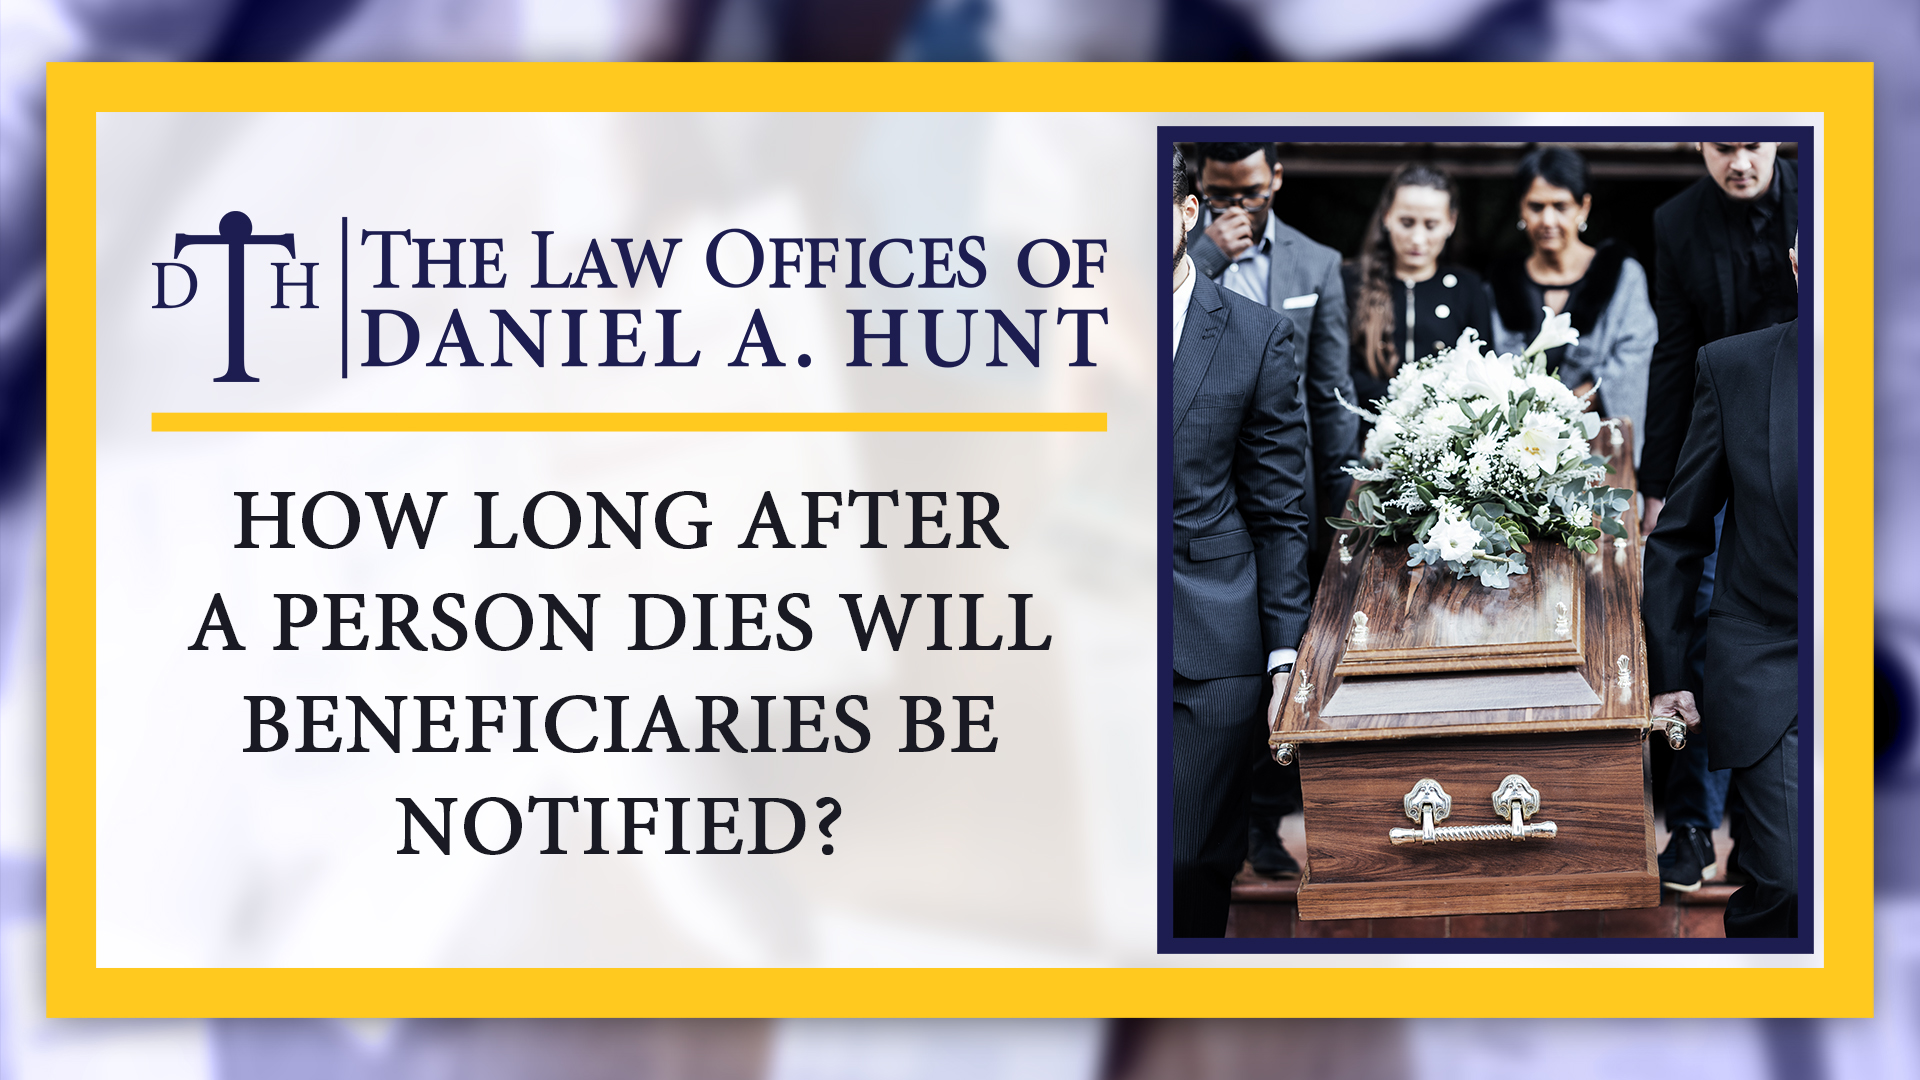 How Long After a Person Dies Will Beneficiaries Be Notified